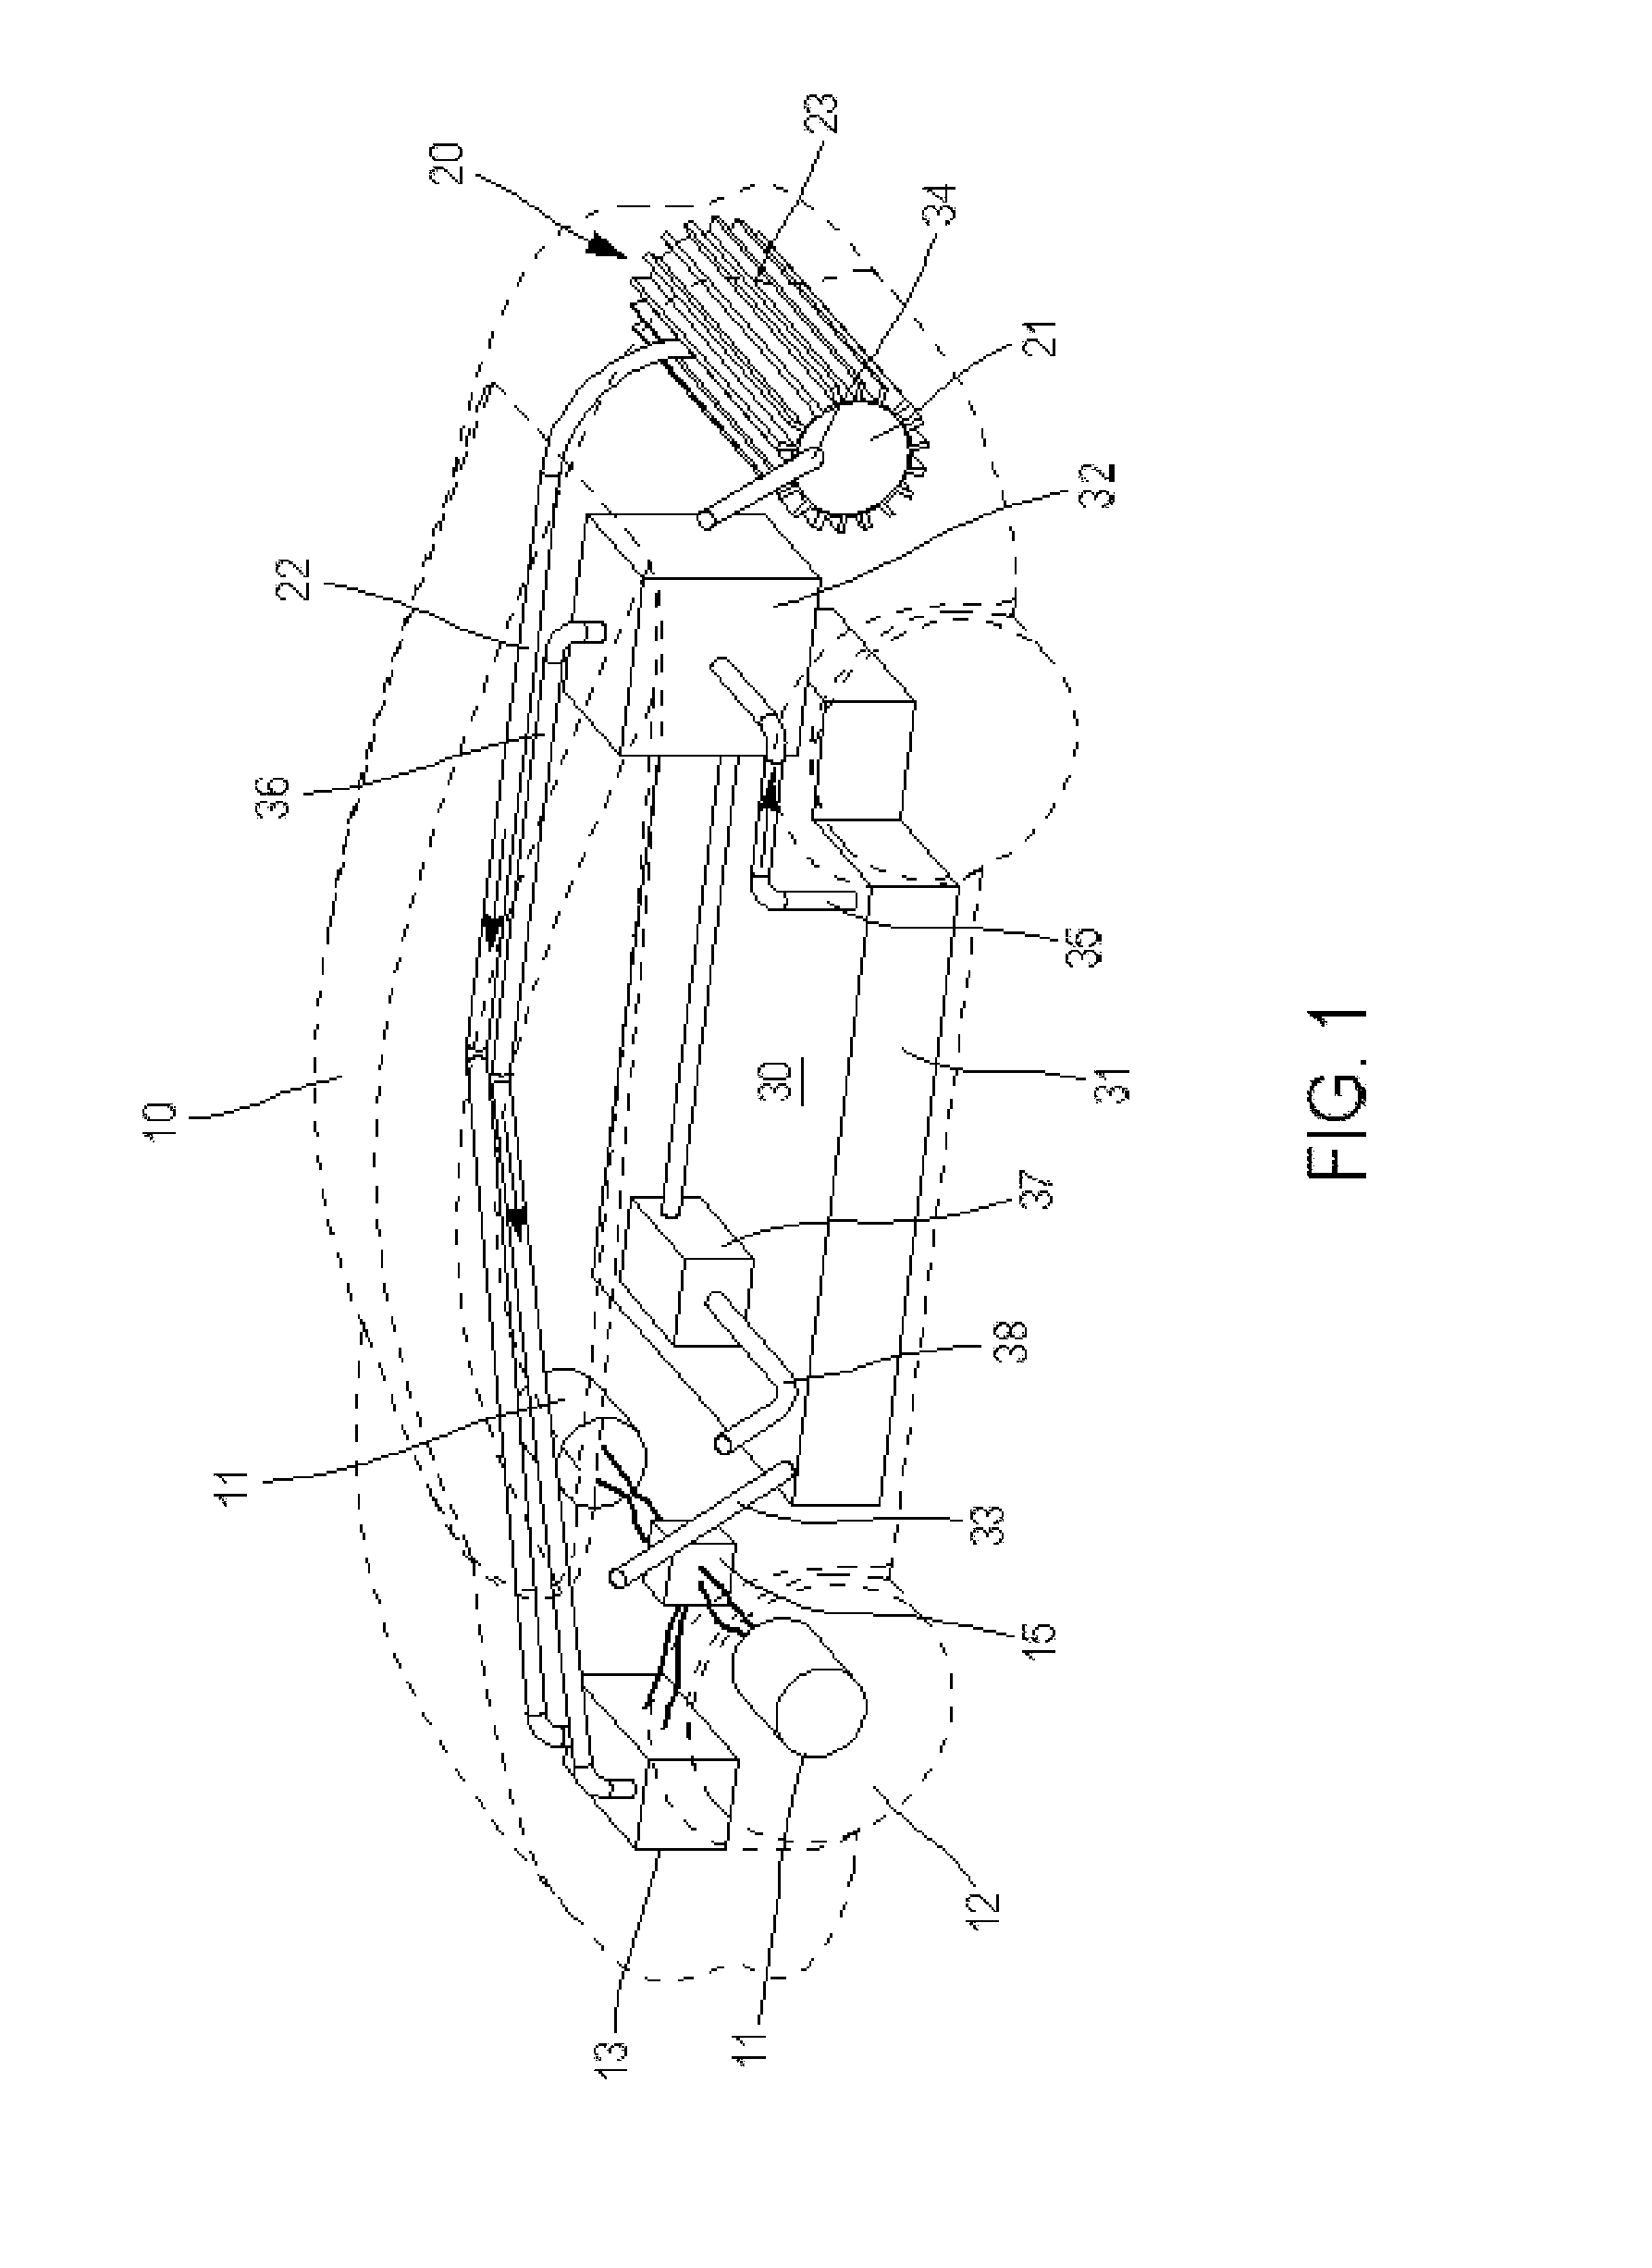 System for Producing and Supplying Hydrogen and Sodium Chlorate, Comprising a Sodium Chloride Electrolyser for Producing Sodium Chlorate